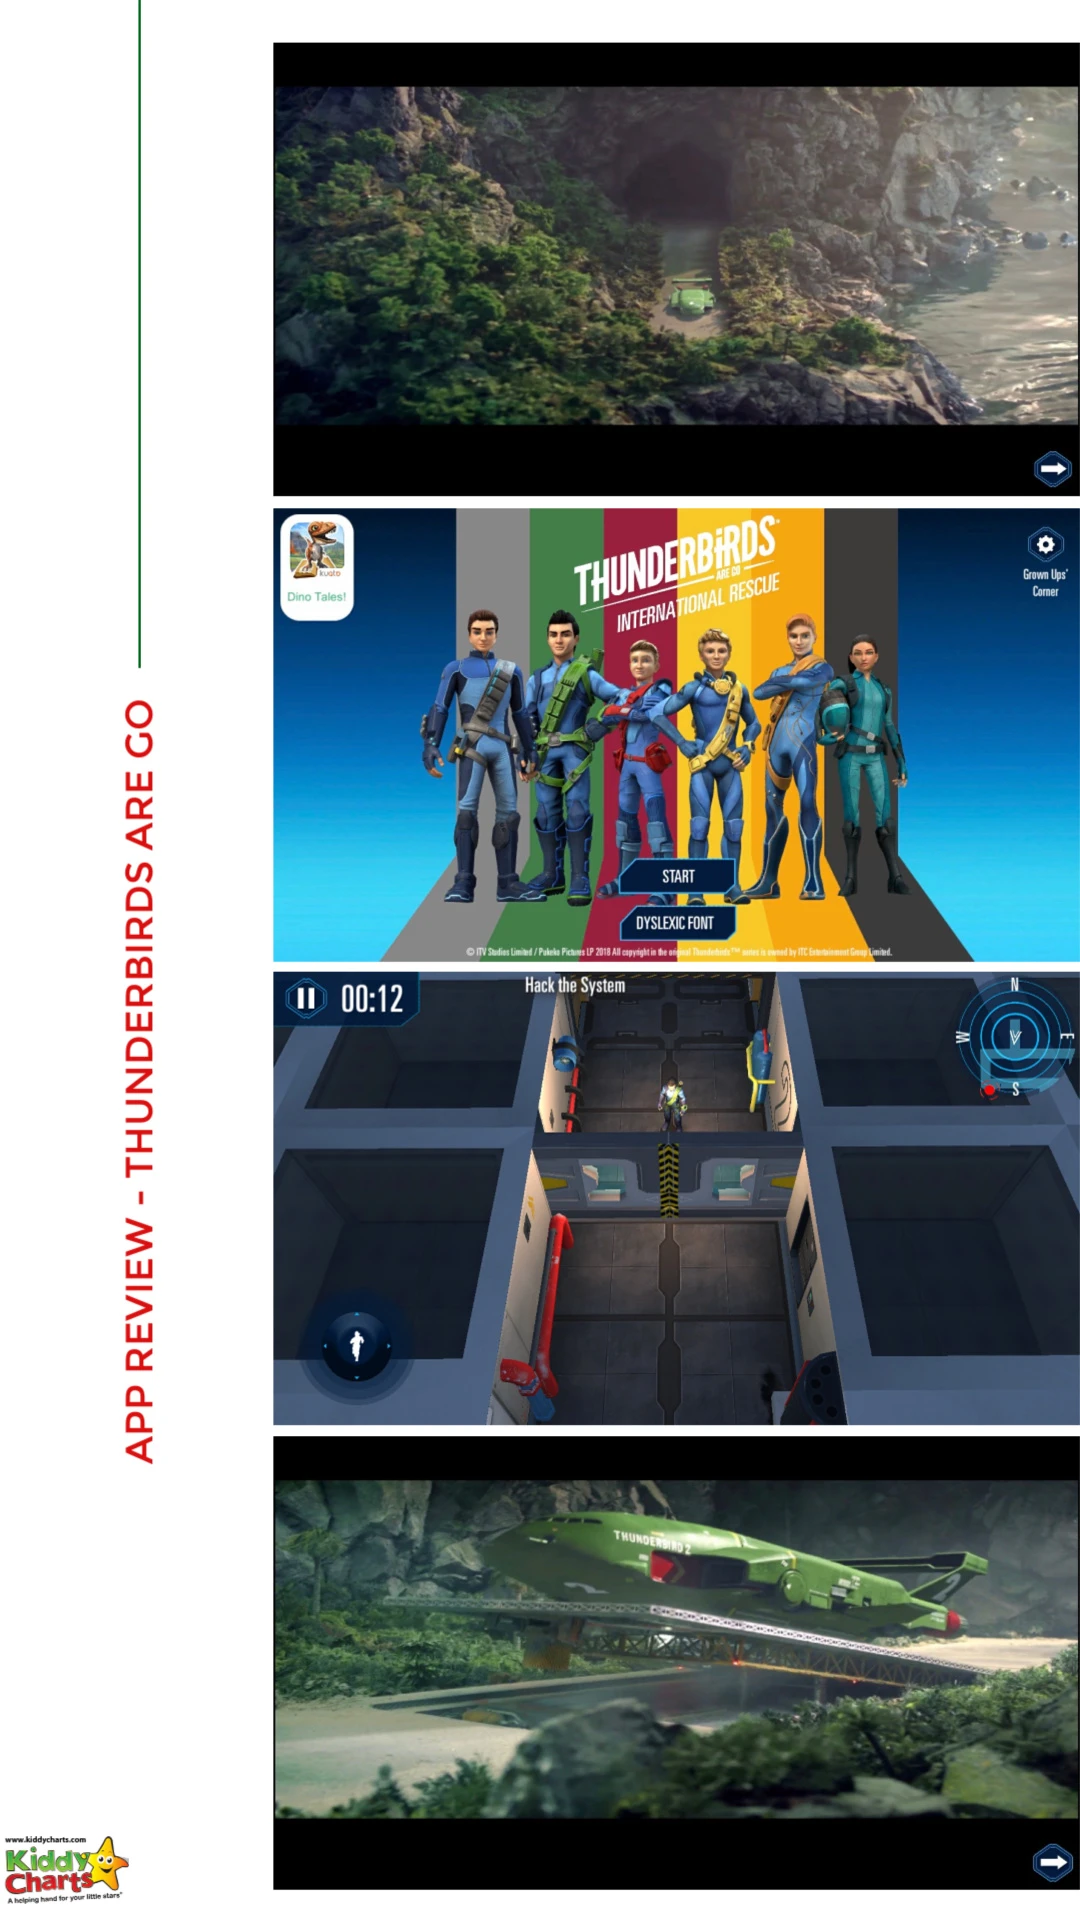 Thunderbirds are Go is the new app from ITV and Kuato - and we've taken a look. Why not pop over and take a look! #apps #technology #reviews #iPhone